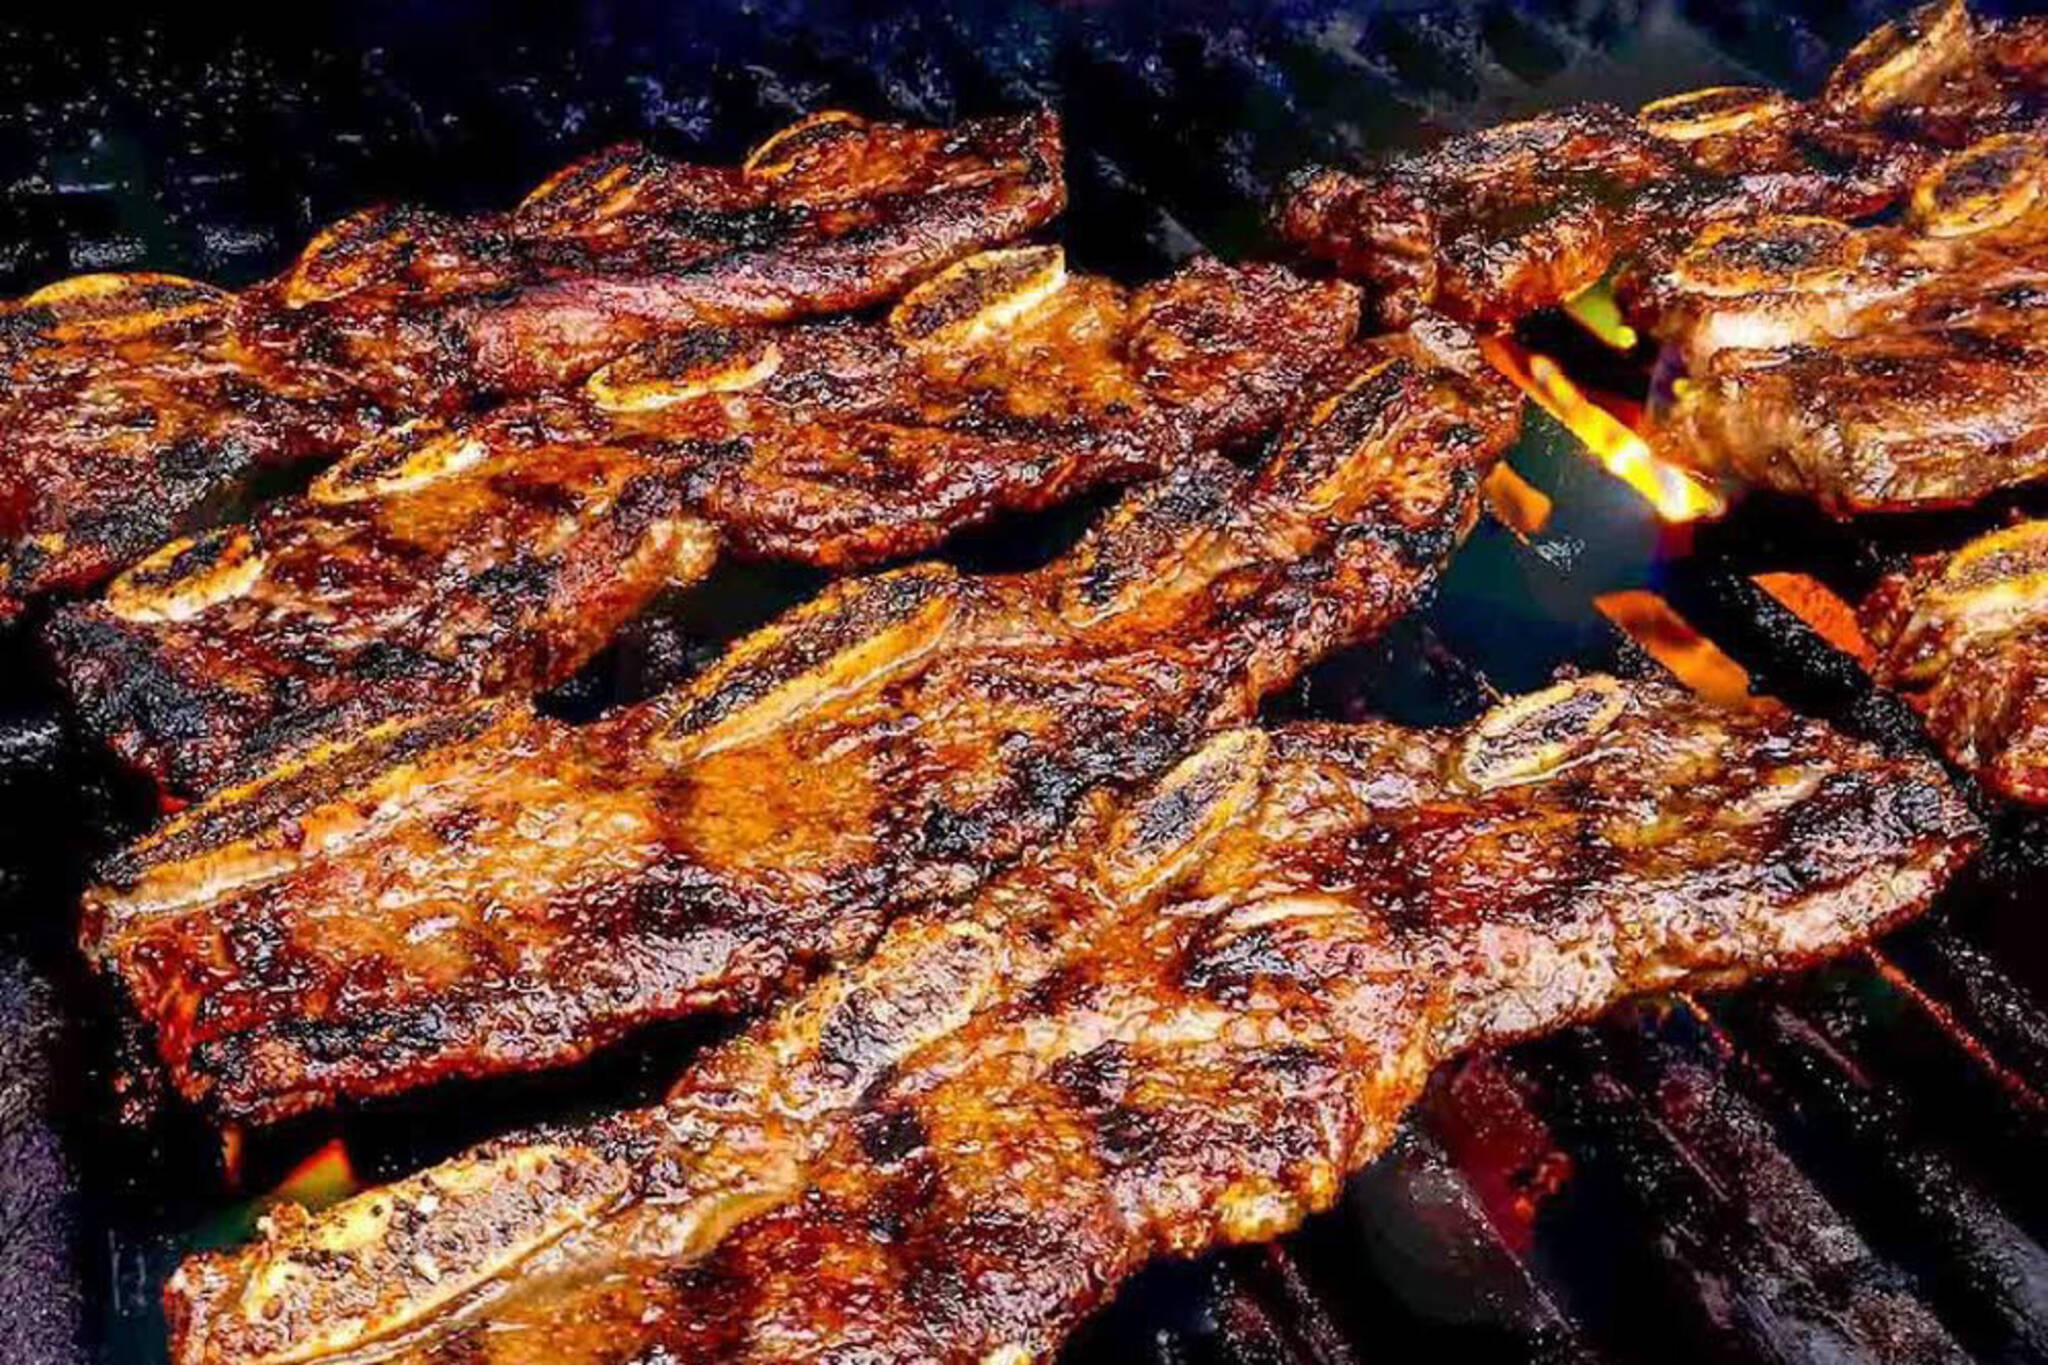 Huge Canadian ribfest is back in Toronto this summer